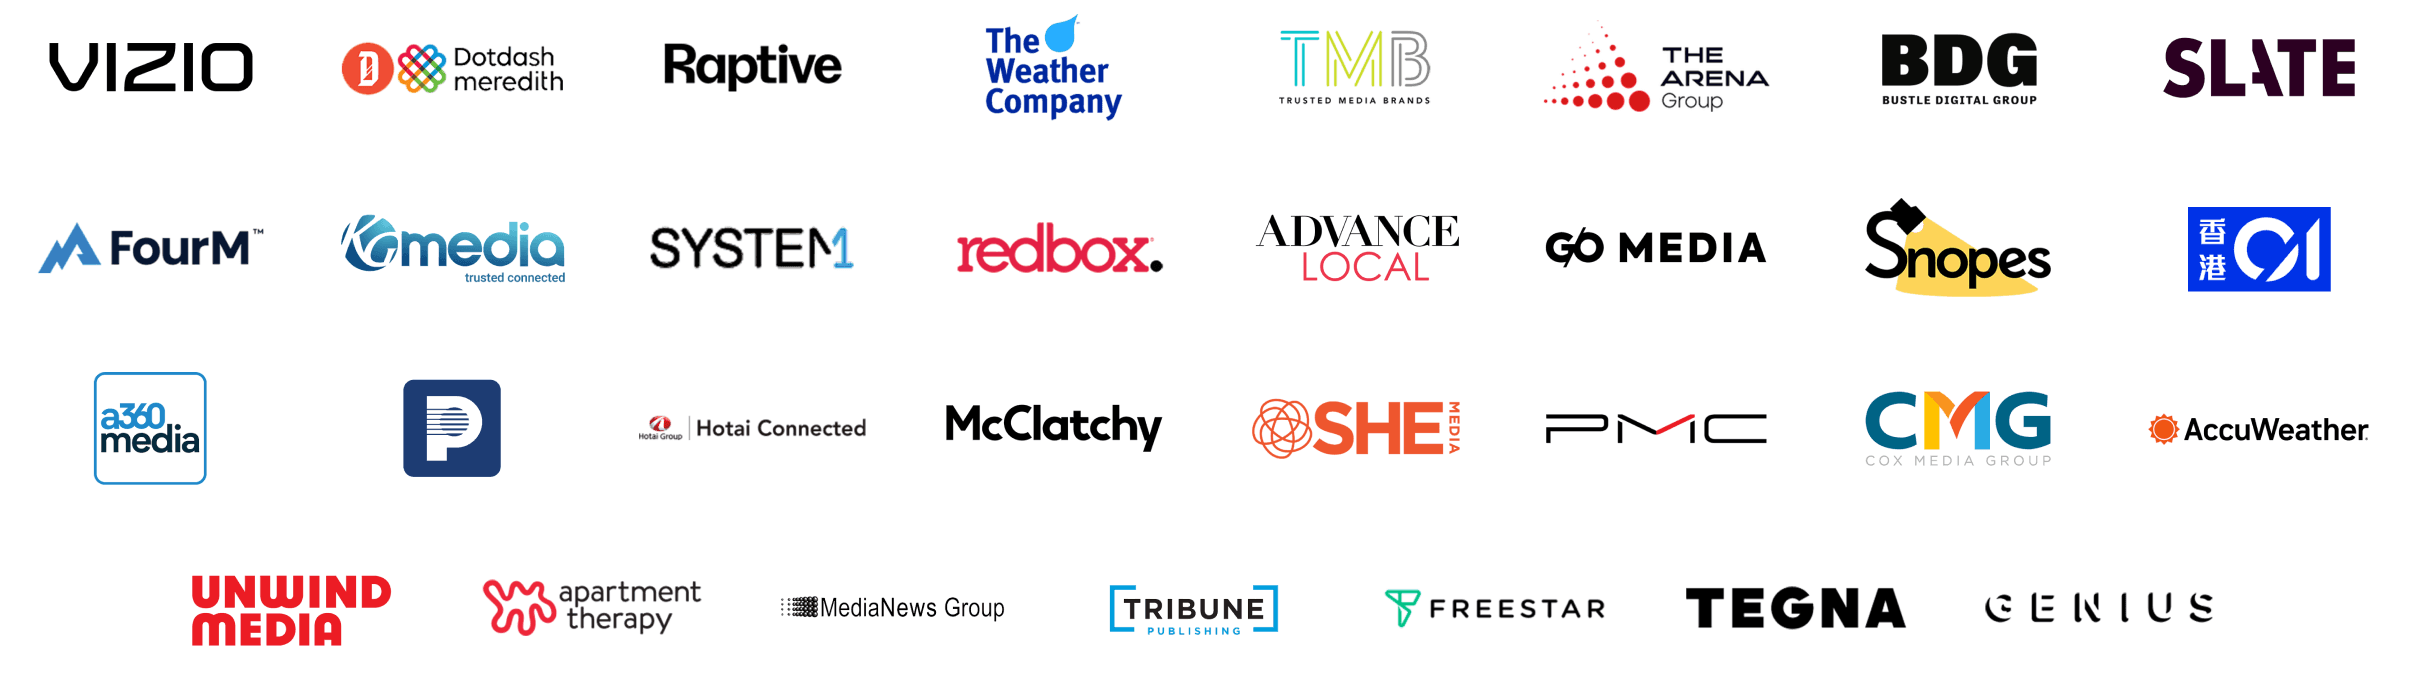 Image features various company logos, including Vizio, Dotdash meredith, Raptive, The Weather Company, and more.